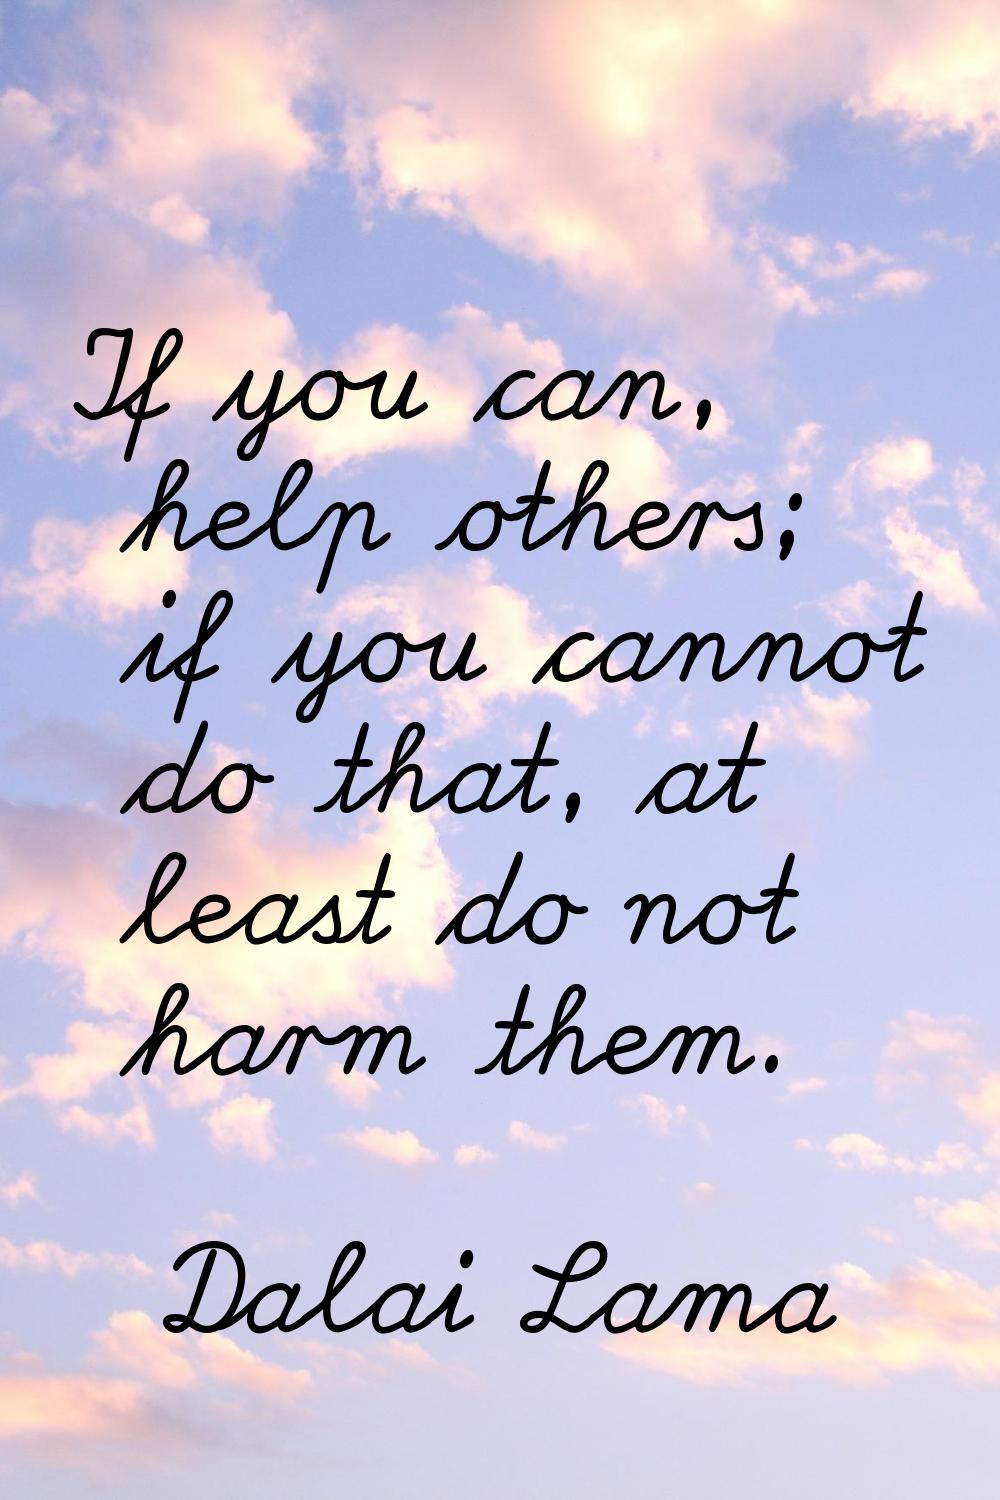 If you can, help others; if you cannot do that, at least do not harm them.